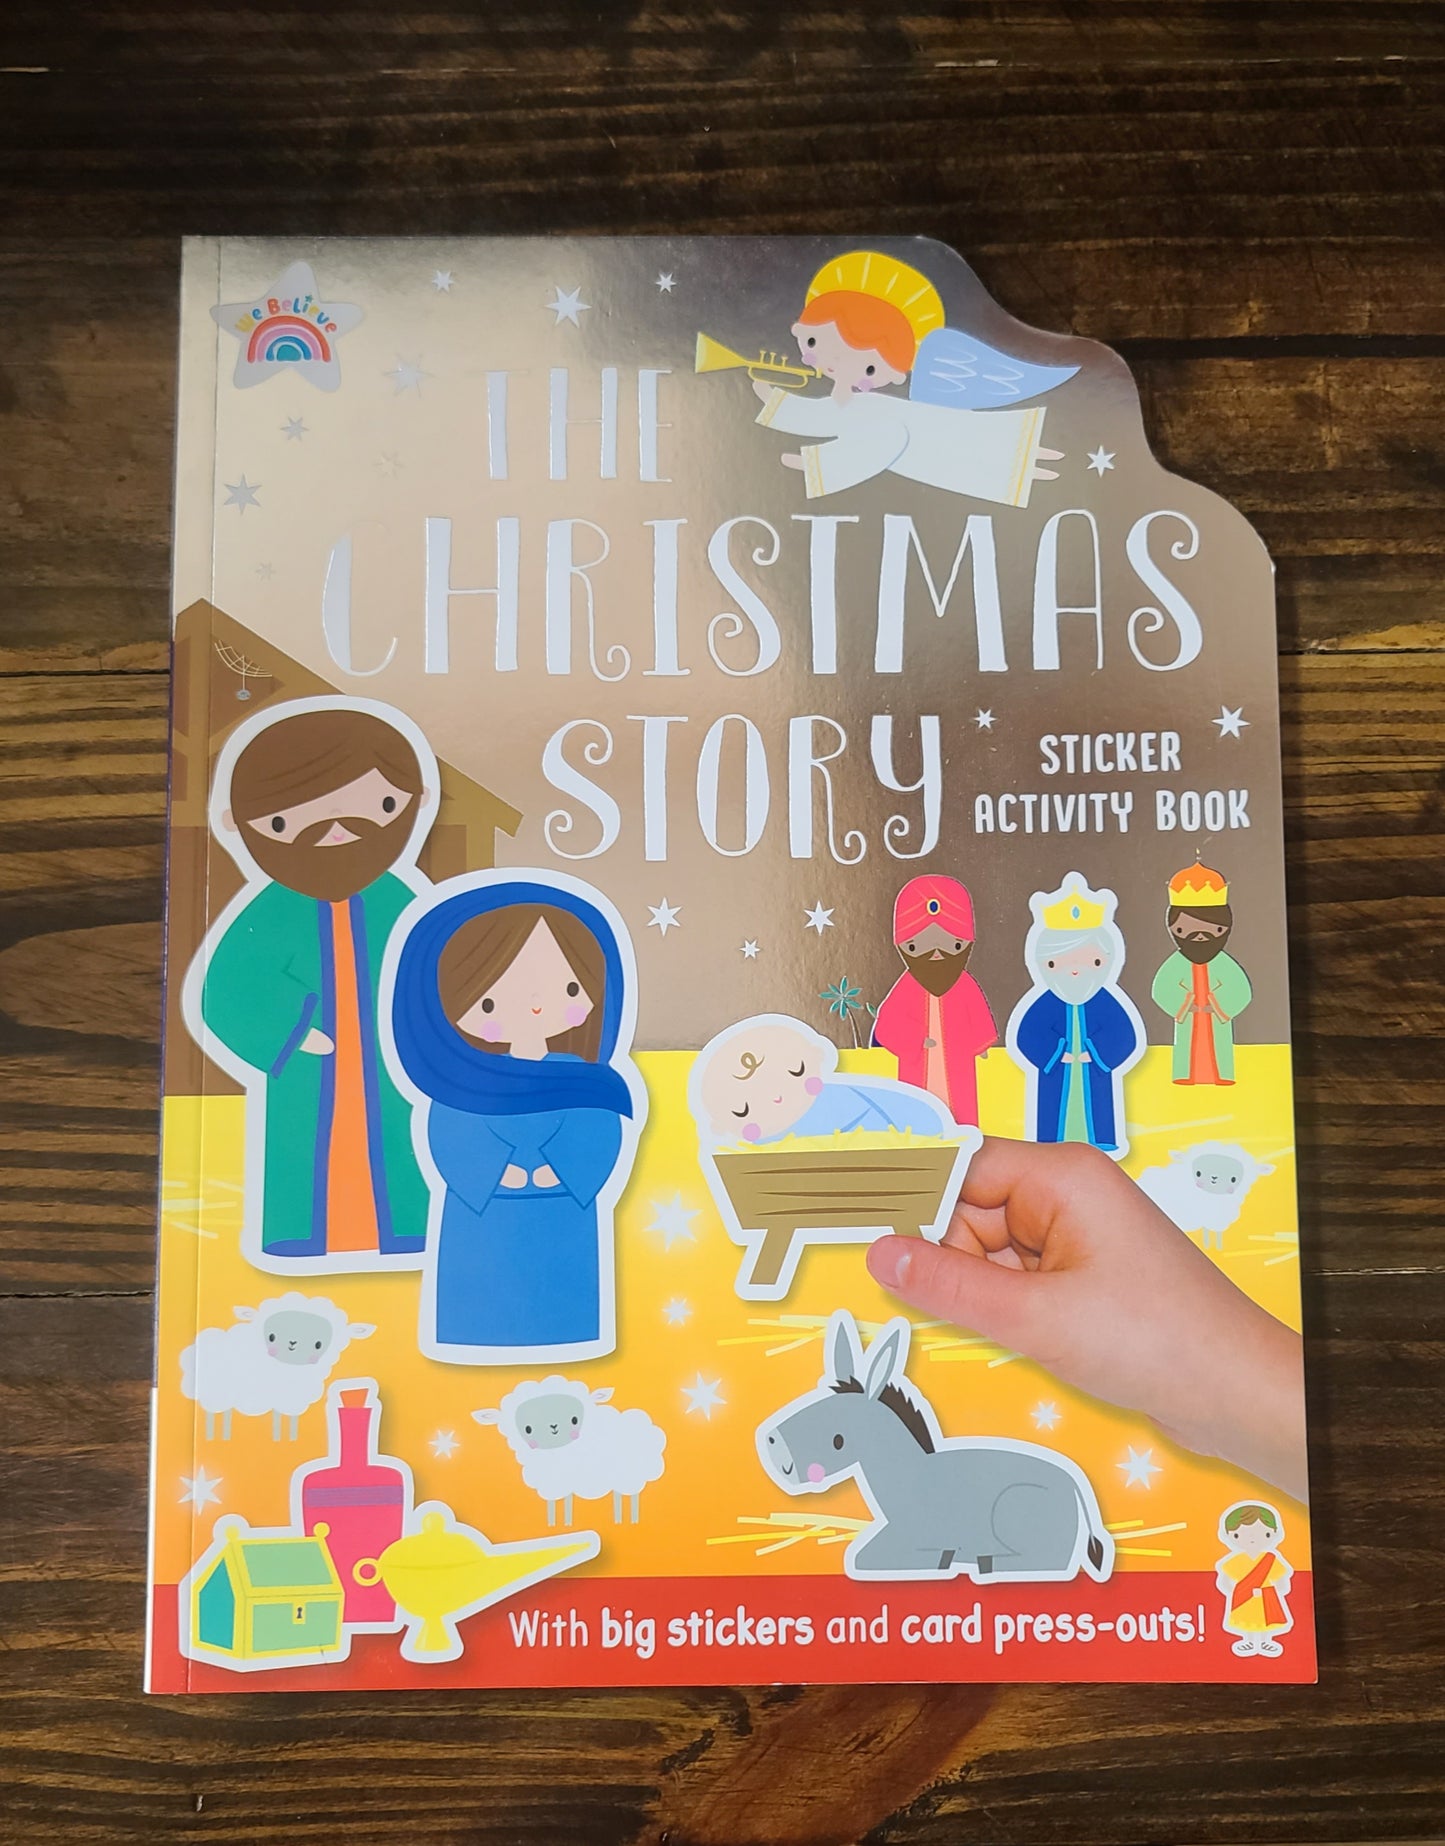 "The Christmas Story" Sticker Book